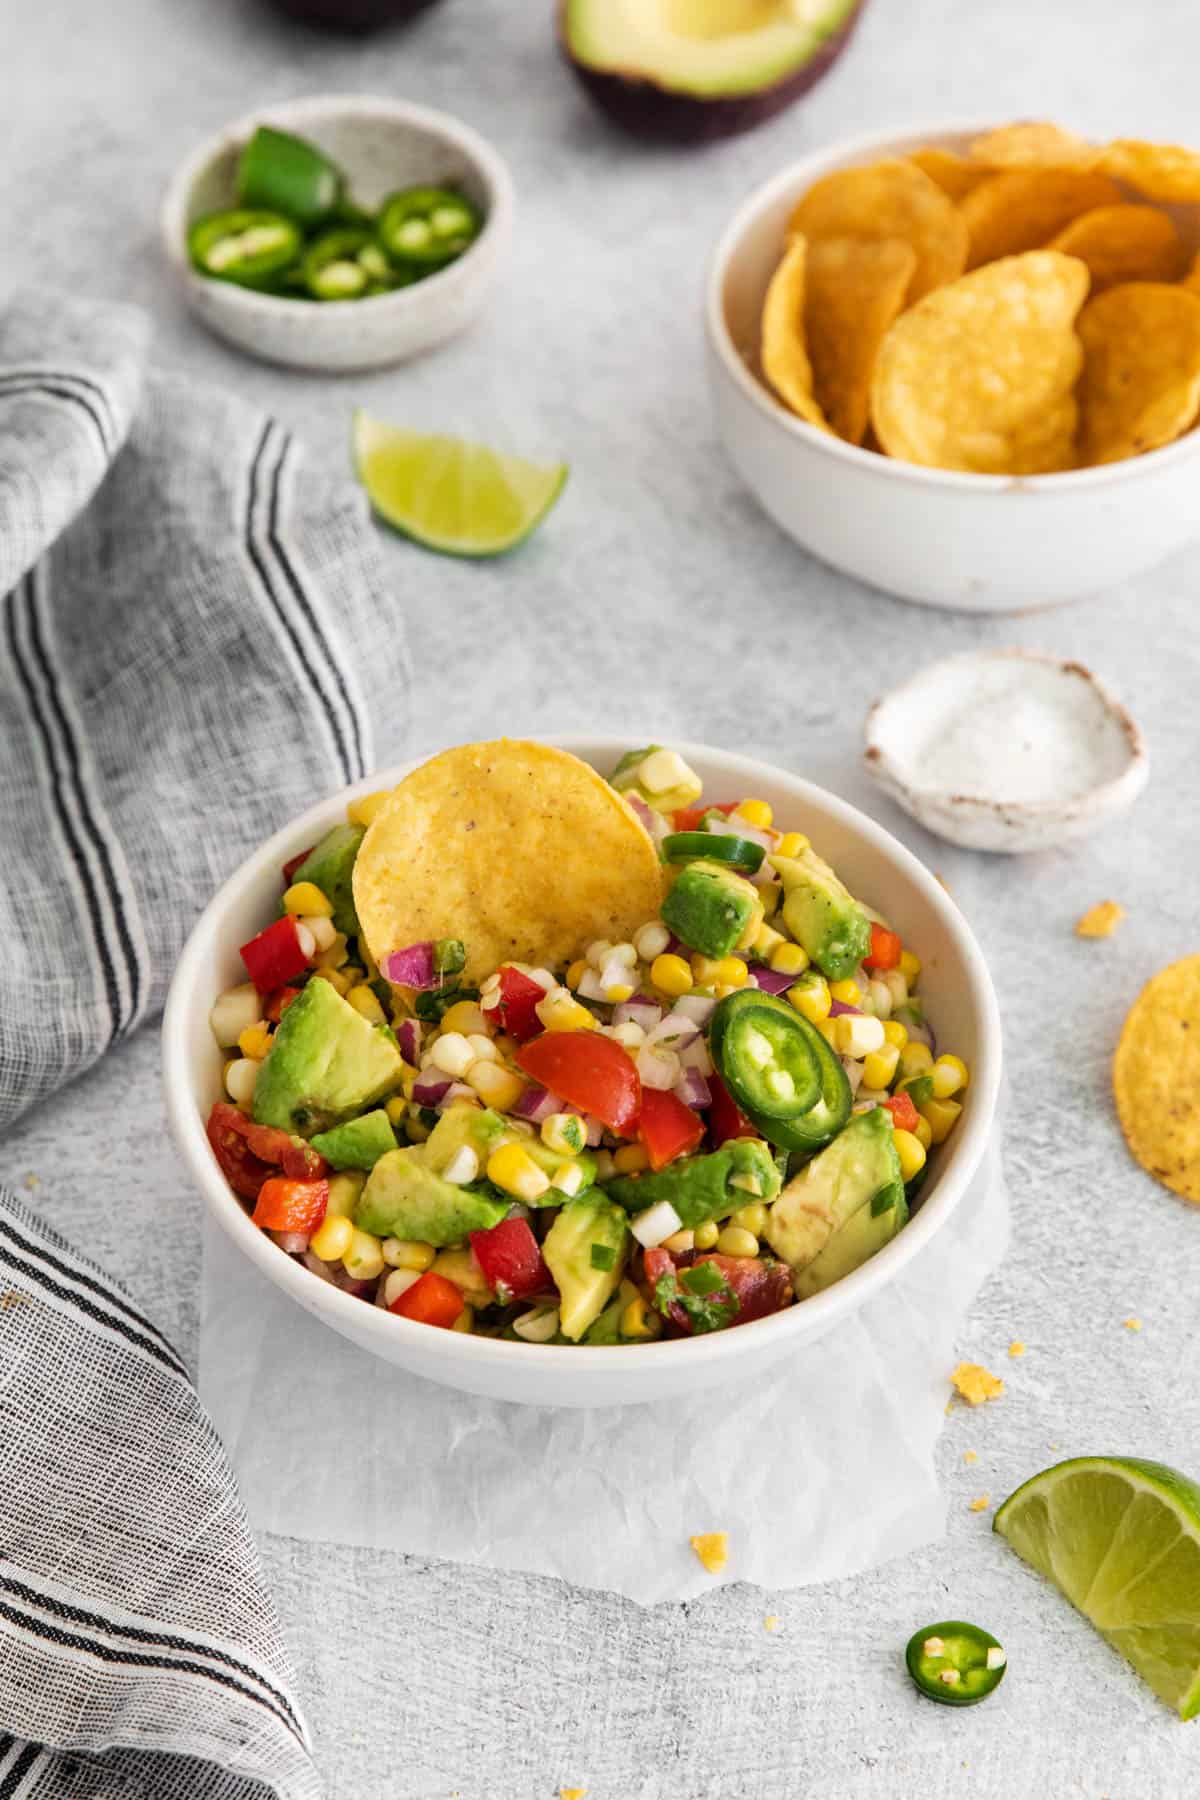 A bowl of corn and avocado salad in front of bowls of corn tortilla chips, limes, and sliced jalapenos.